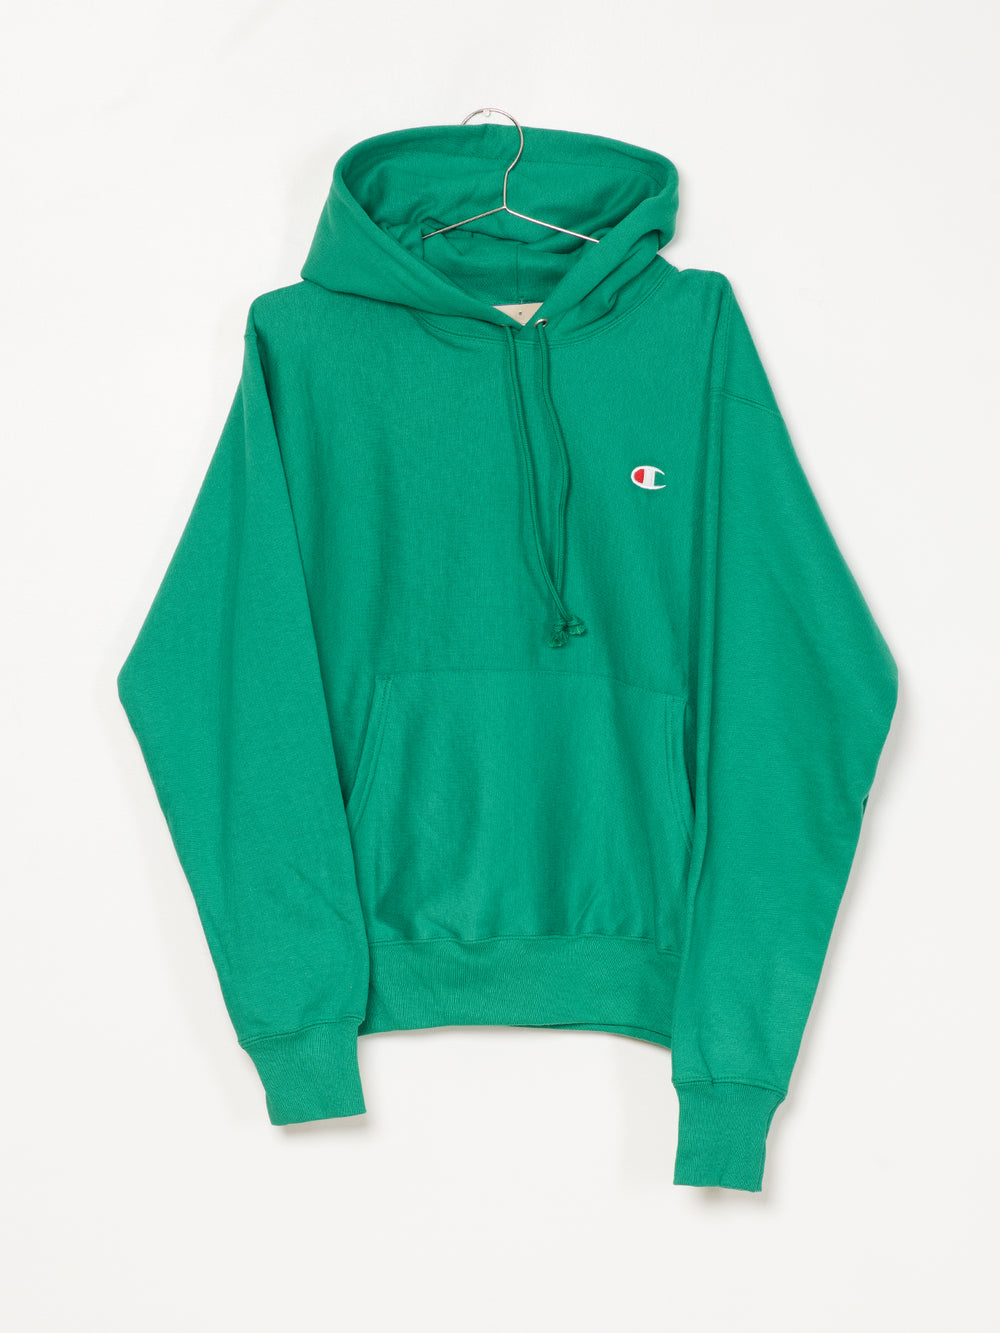 MENS RW PULLOVER HOOD - KELLY GREEN - CLEARANCE